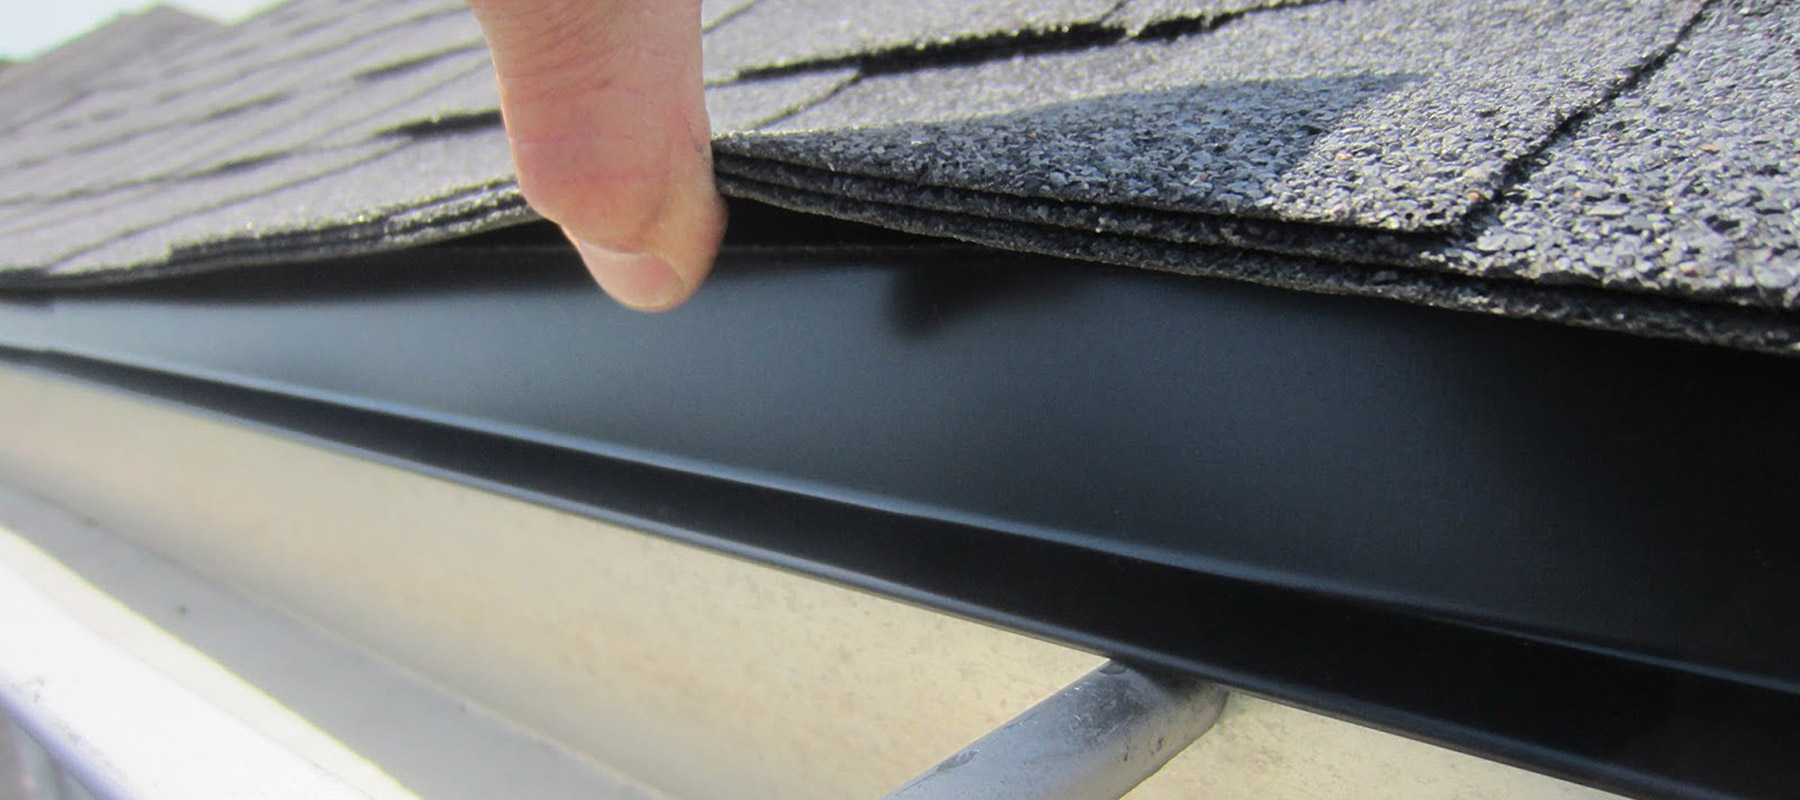 Guide to Drip Edges for Shingle Roofs